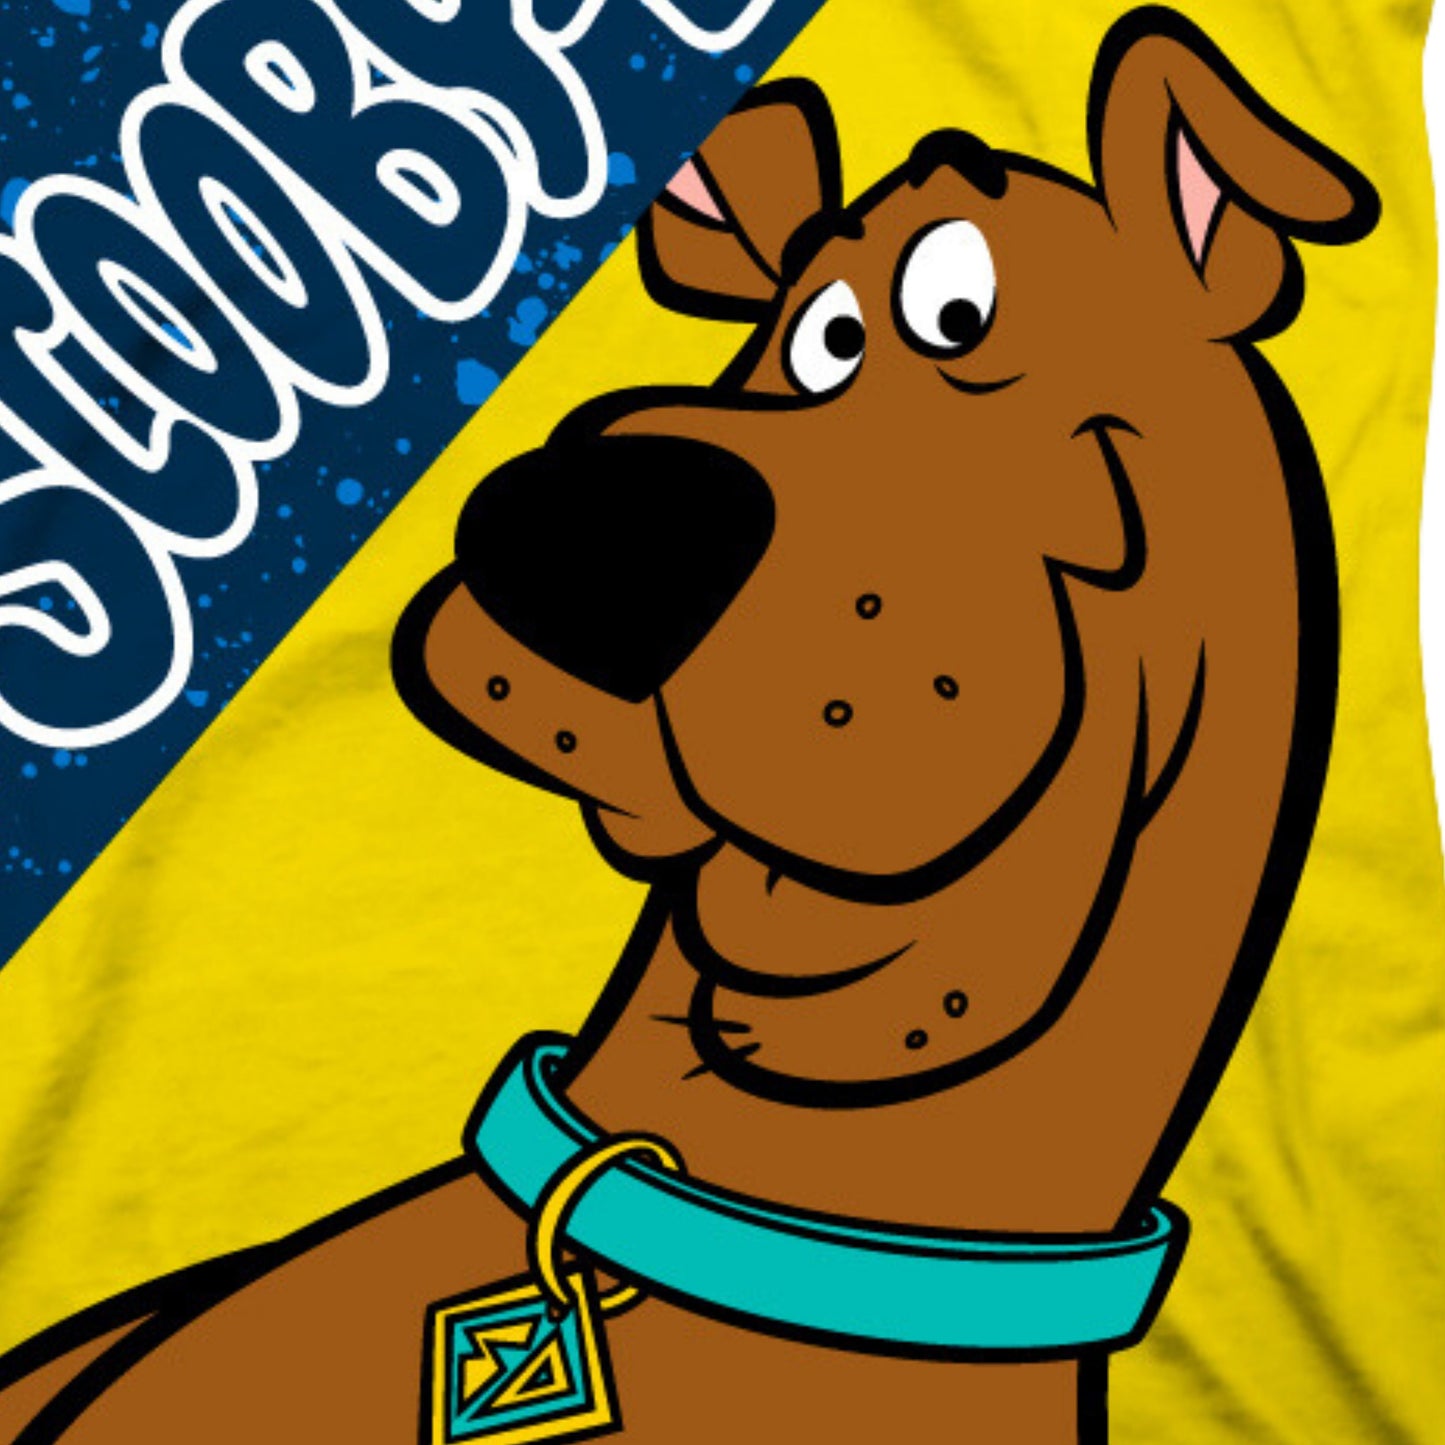 Scooby-Doo Boys T-Shirt - Graphic Design Split T-Shirt and All Over Print Boys Sizes 4-20